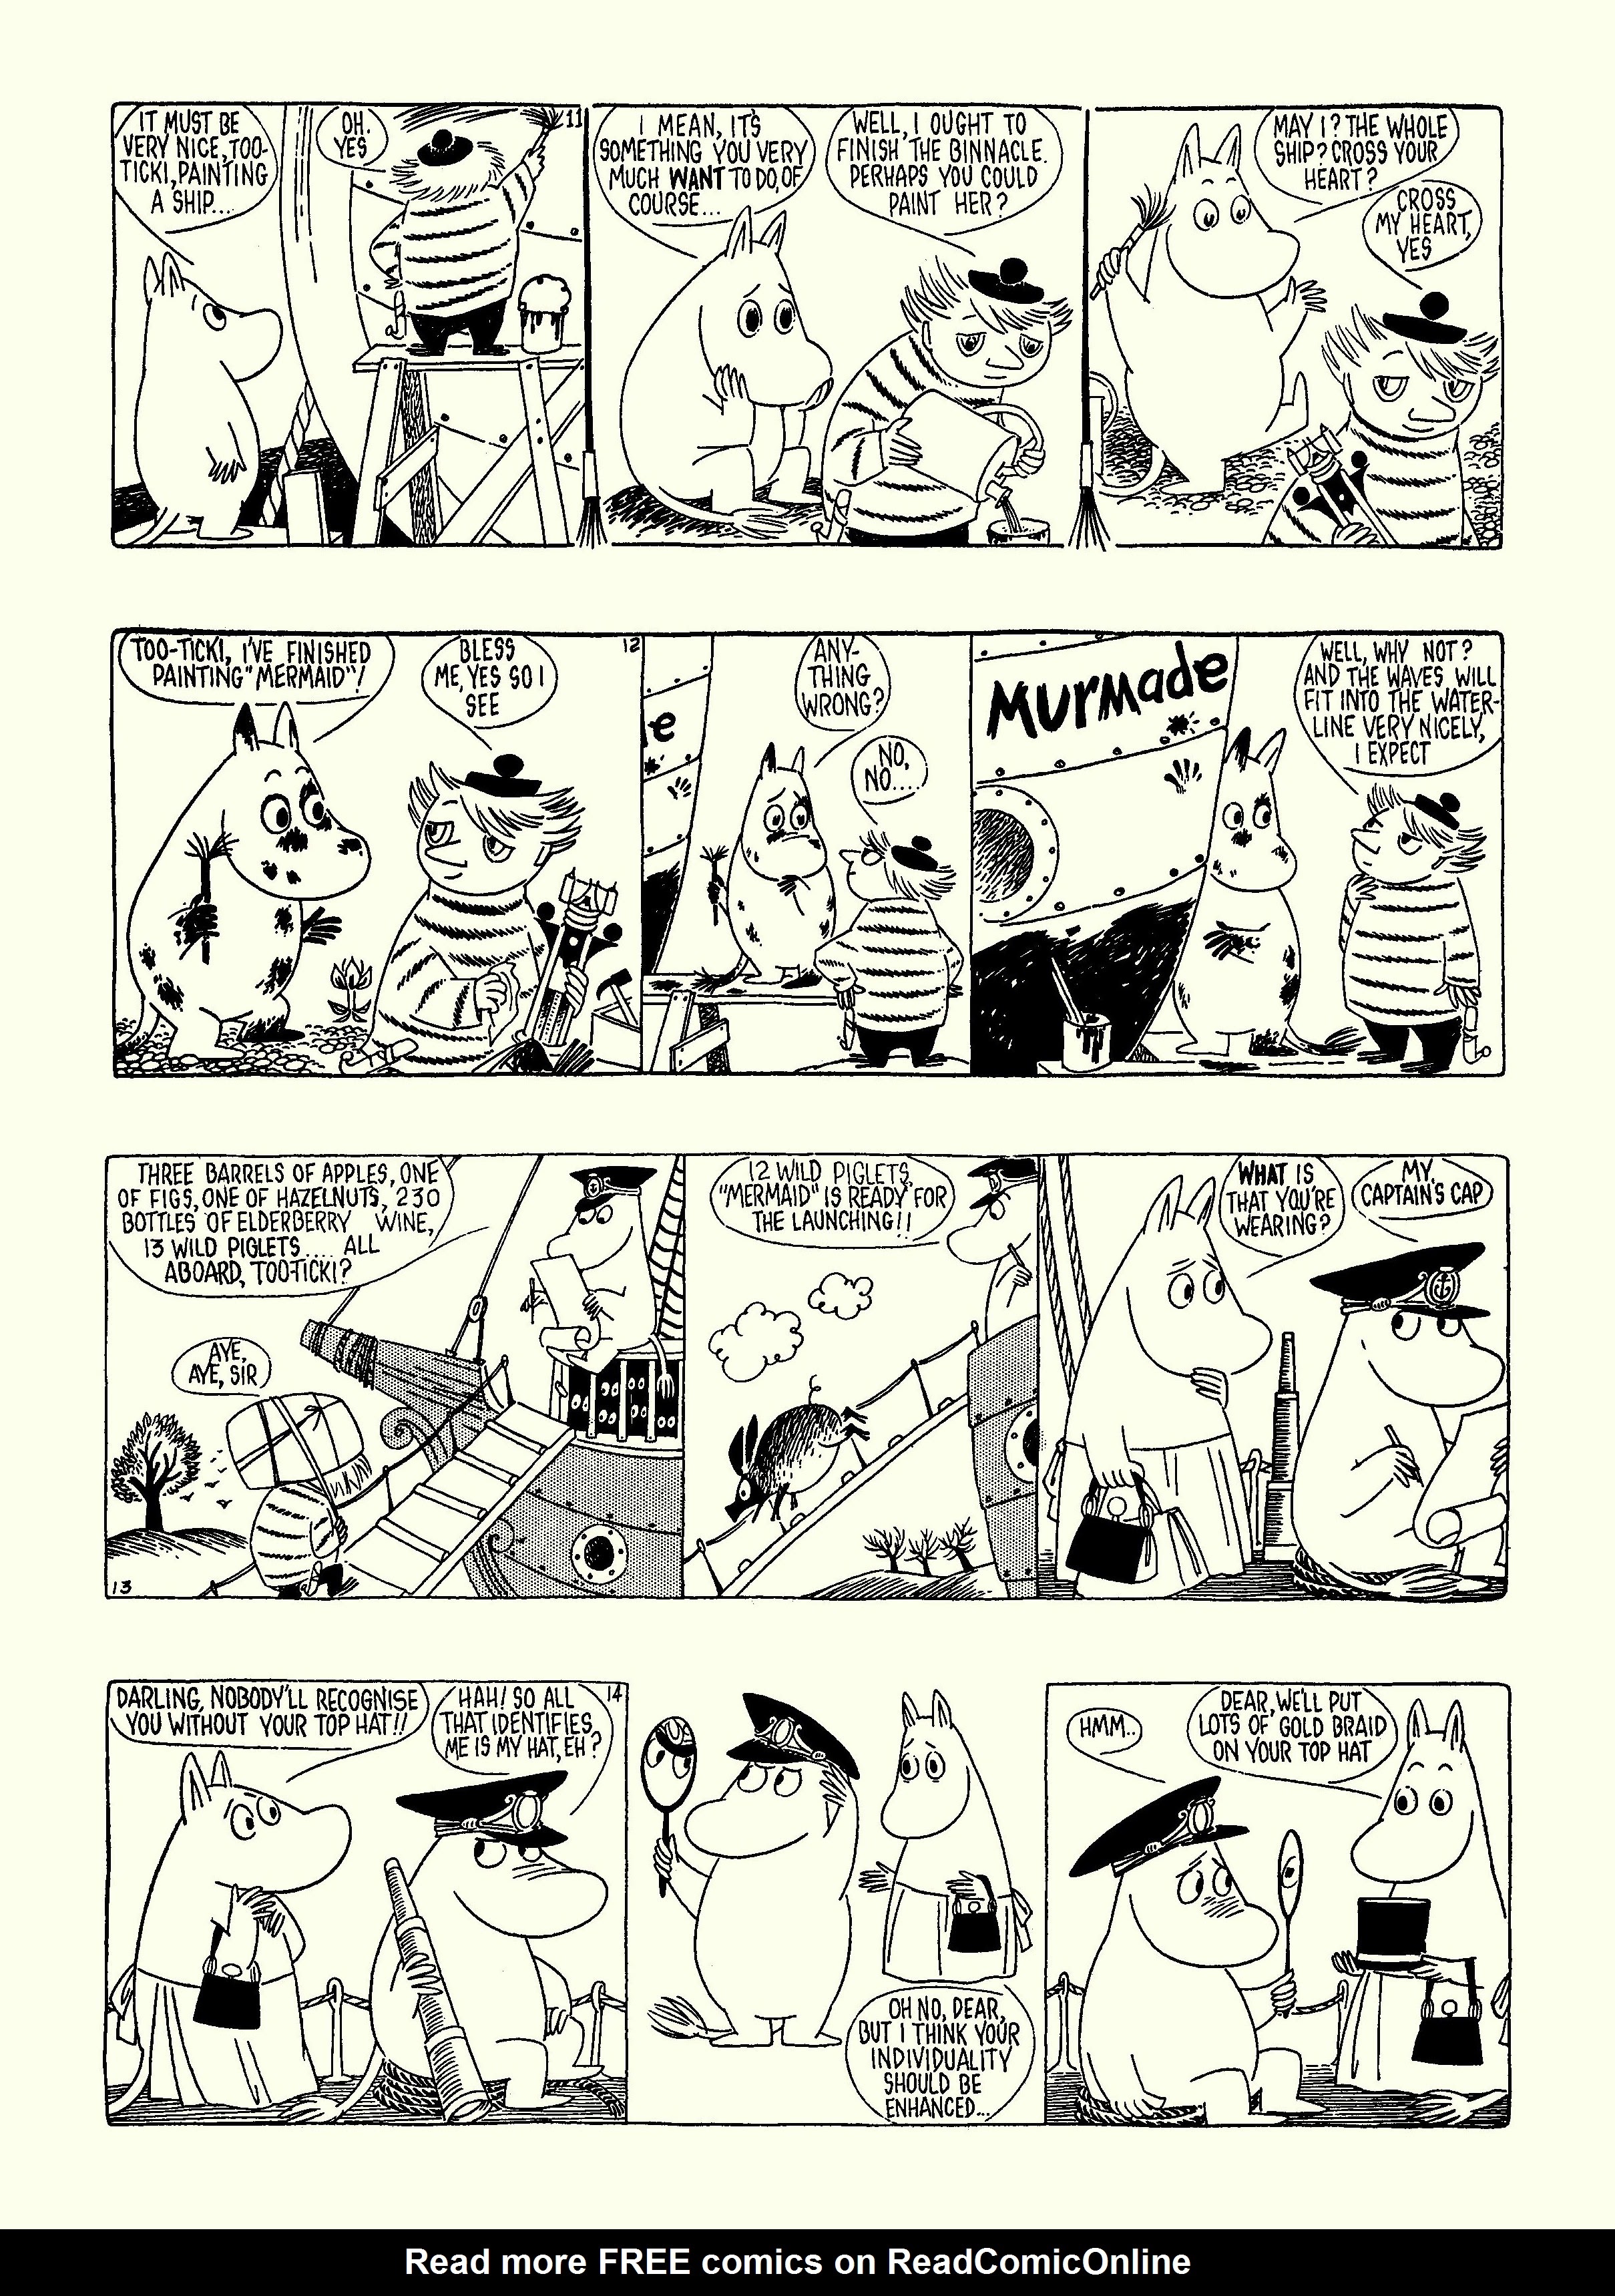 Read online Moomin: The Complete Tove Jansson Comic Strip comic -  Issue # TPB 5 - 34